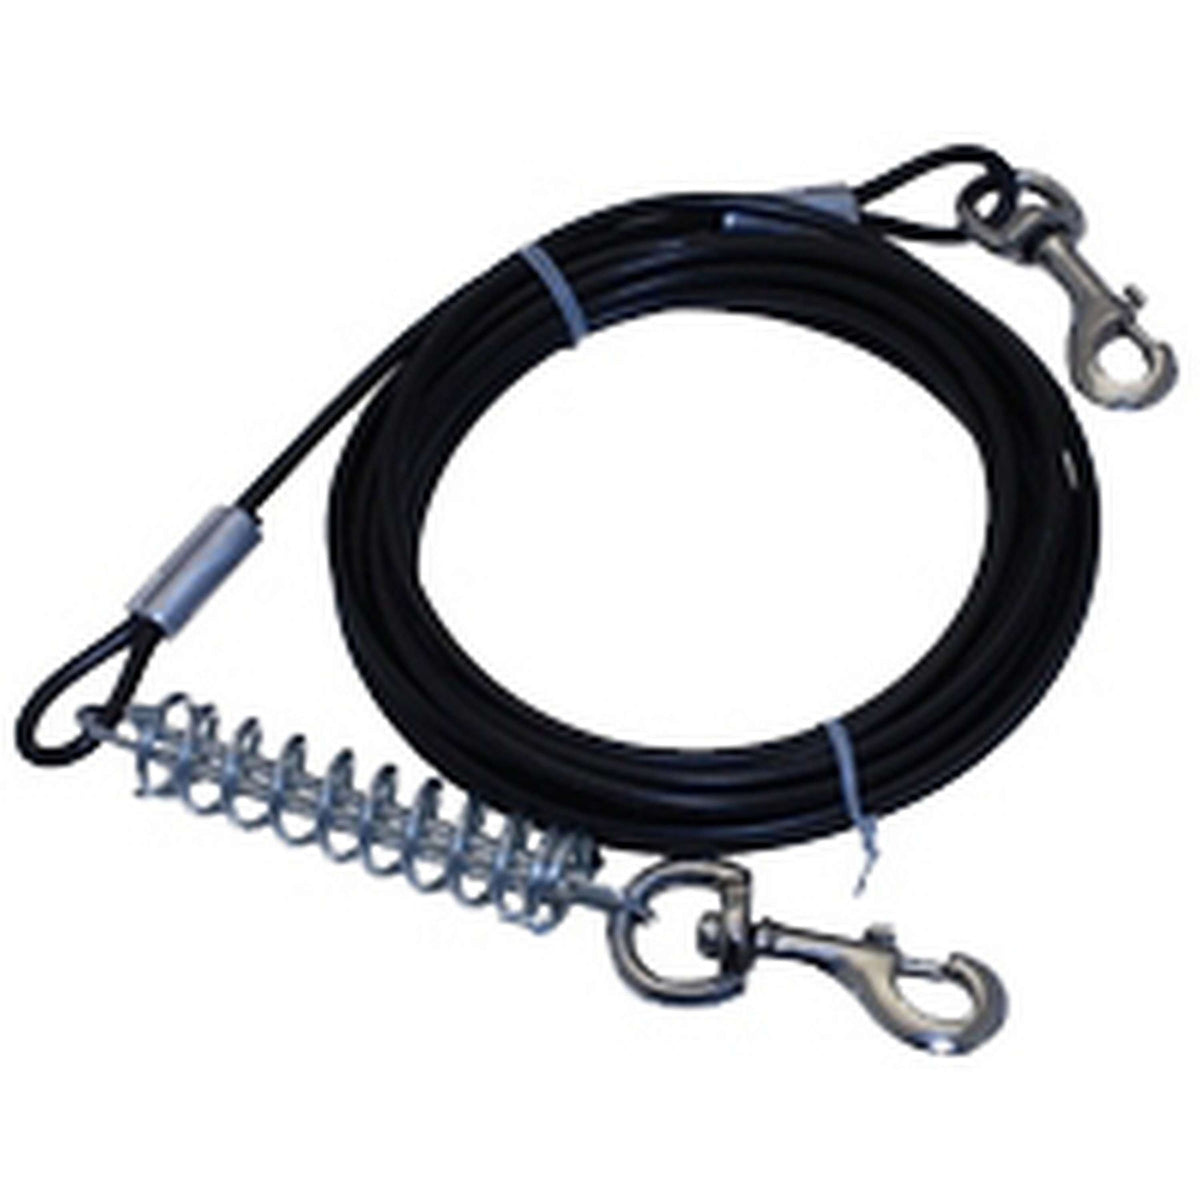 Pawise Heavy Duty Tie Out Cable